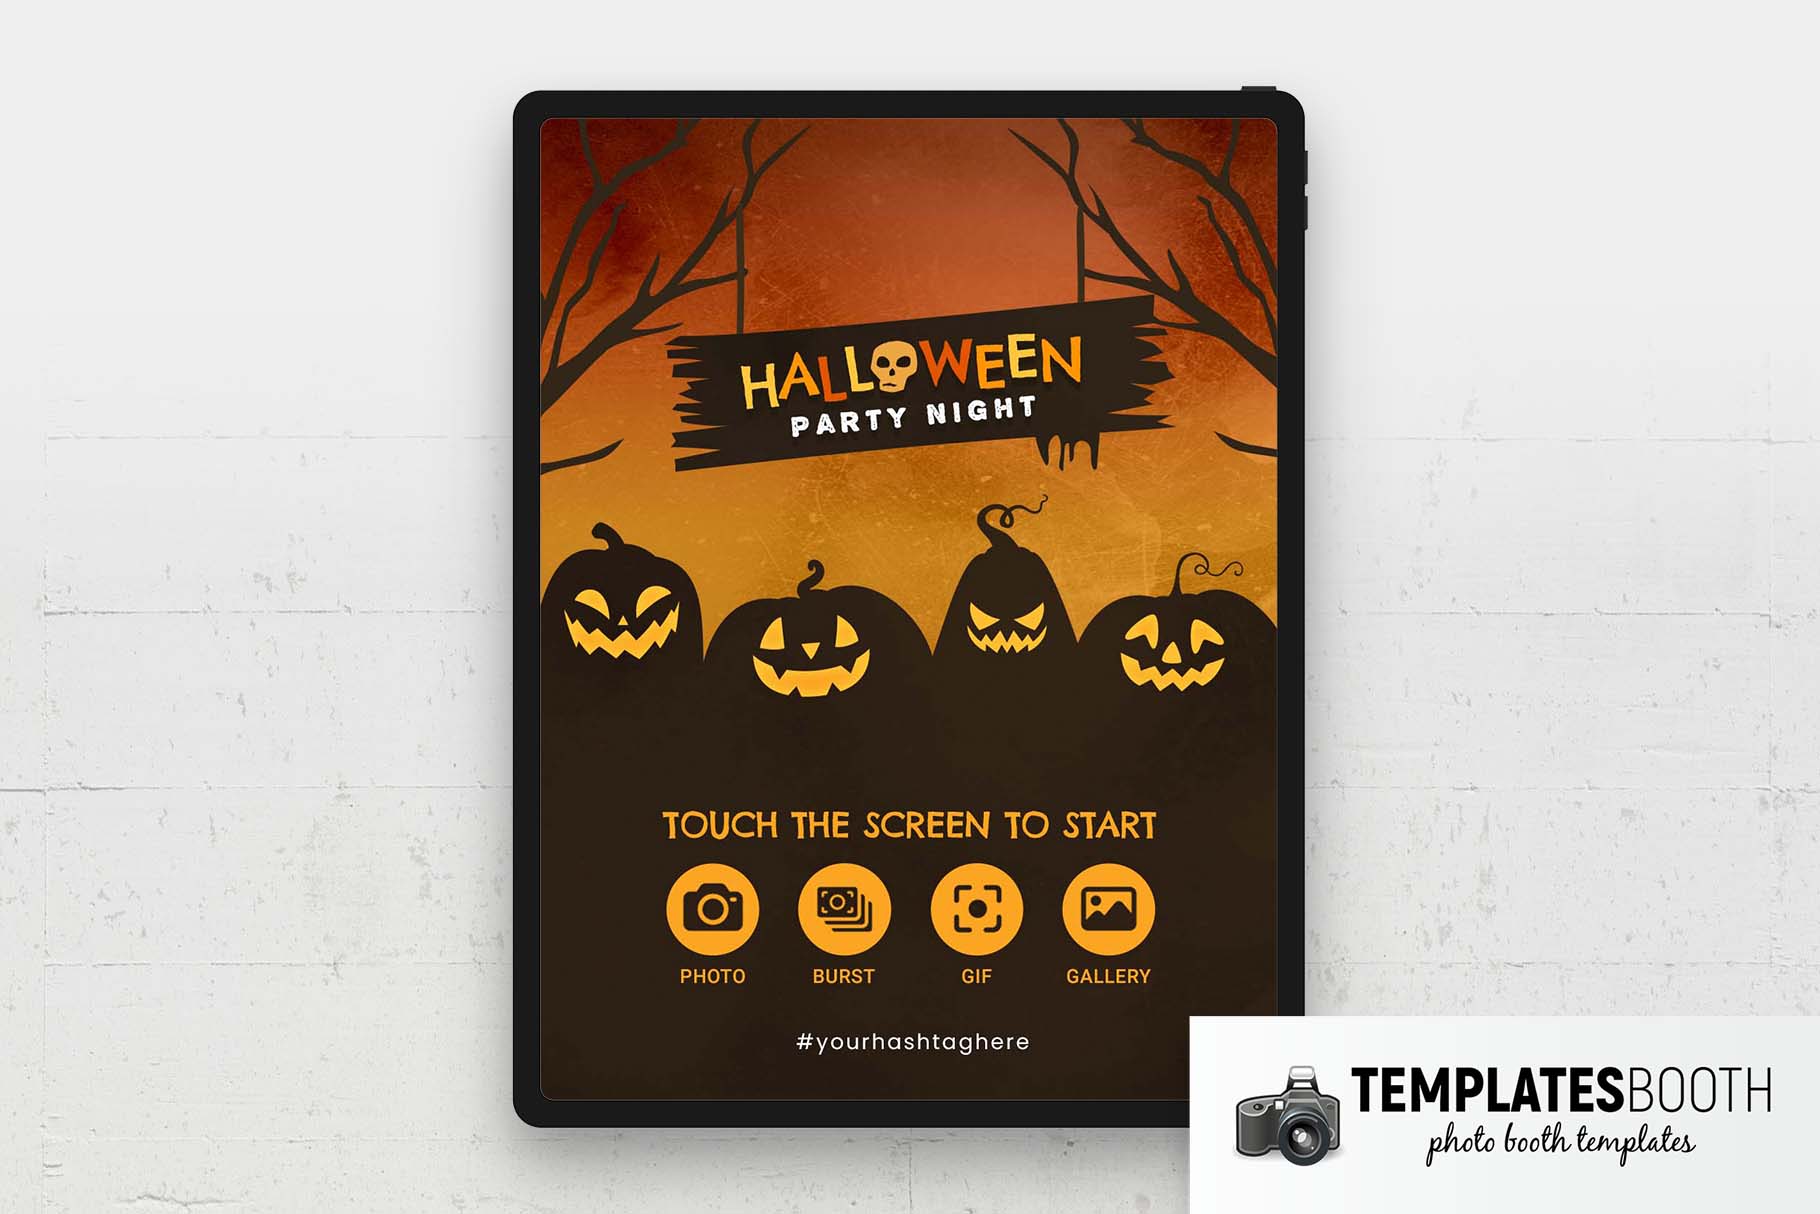 Halloween Party Night Photo Booth Welcome Screen